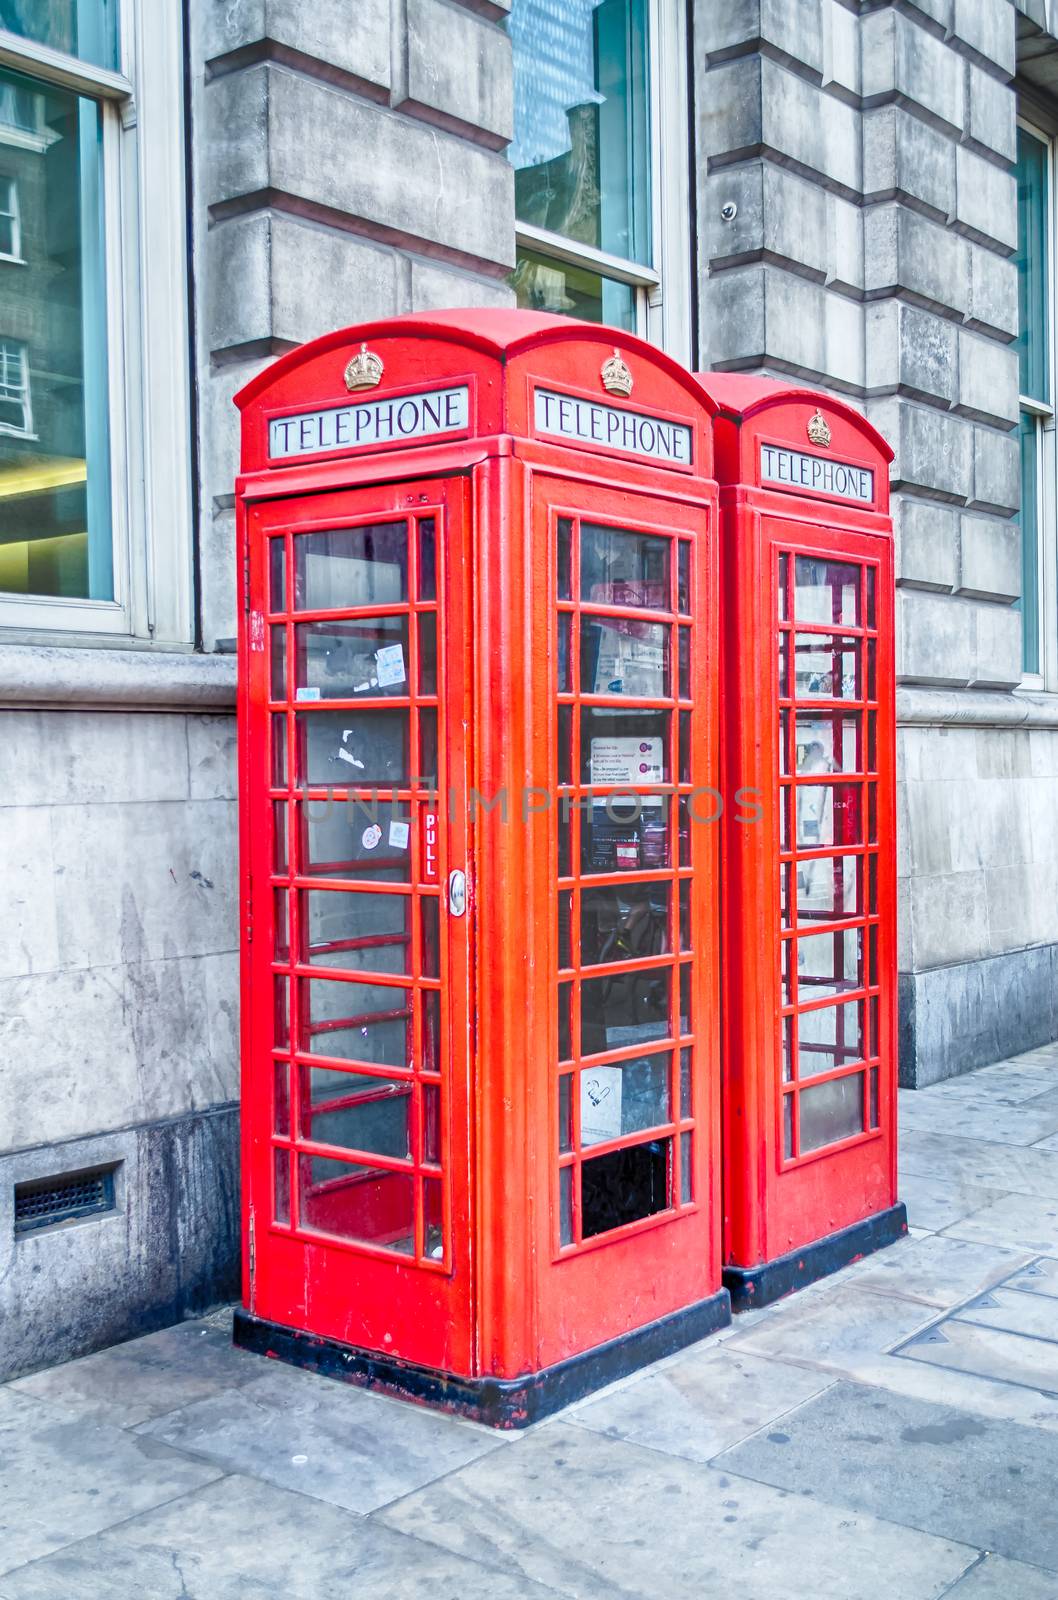 Classic British red phone booth in London UK